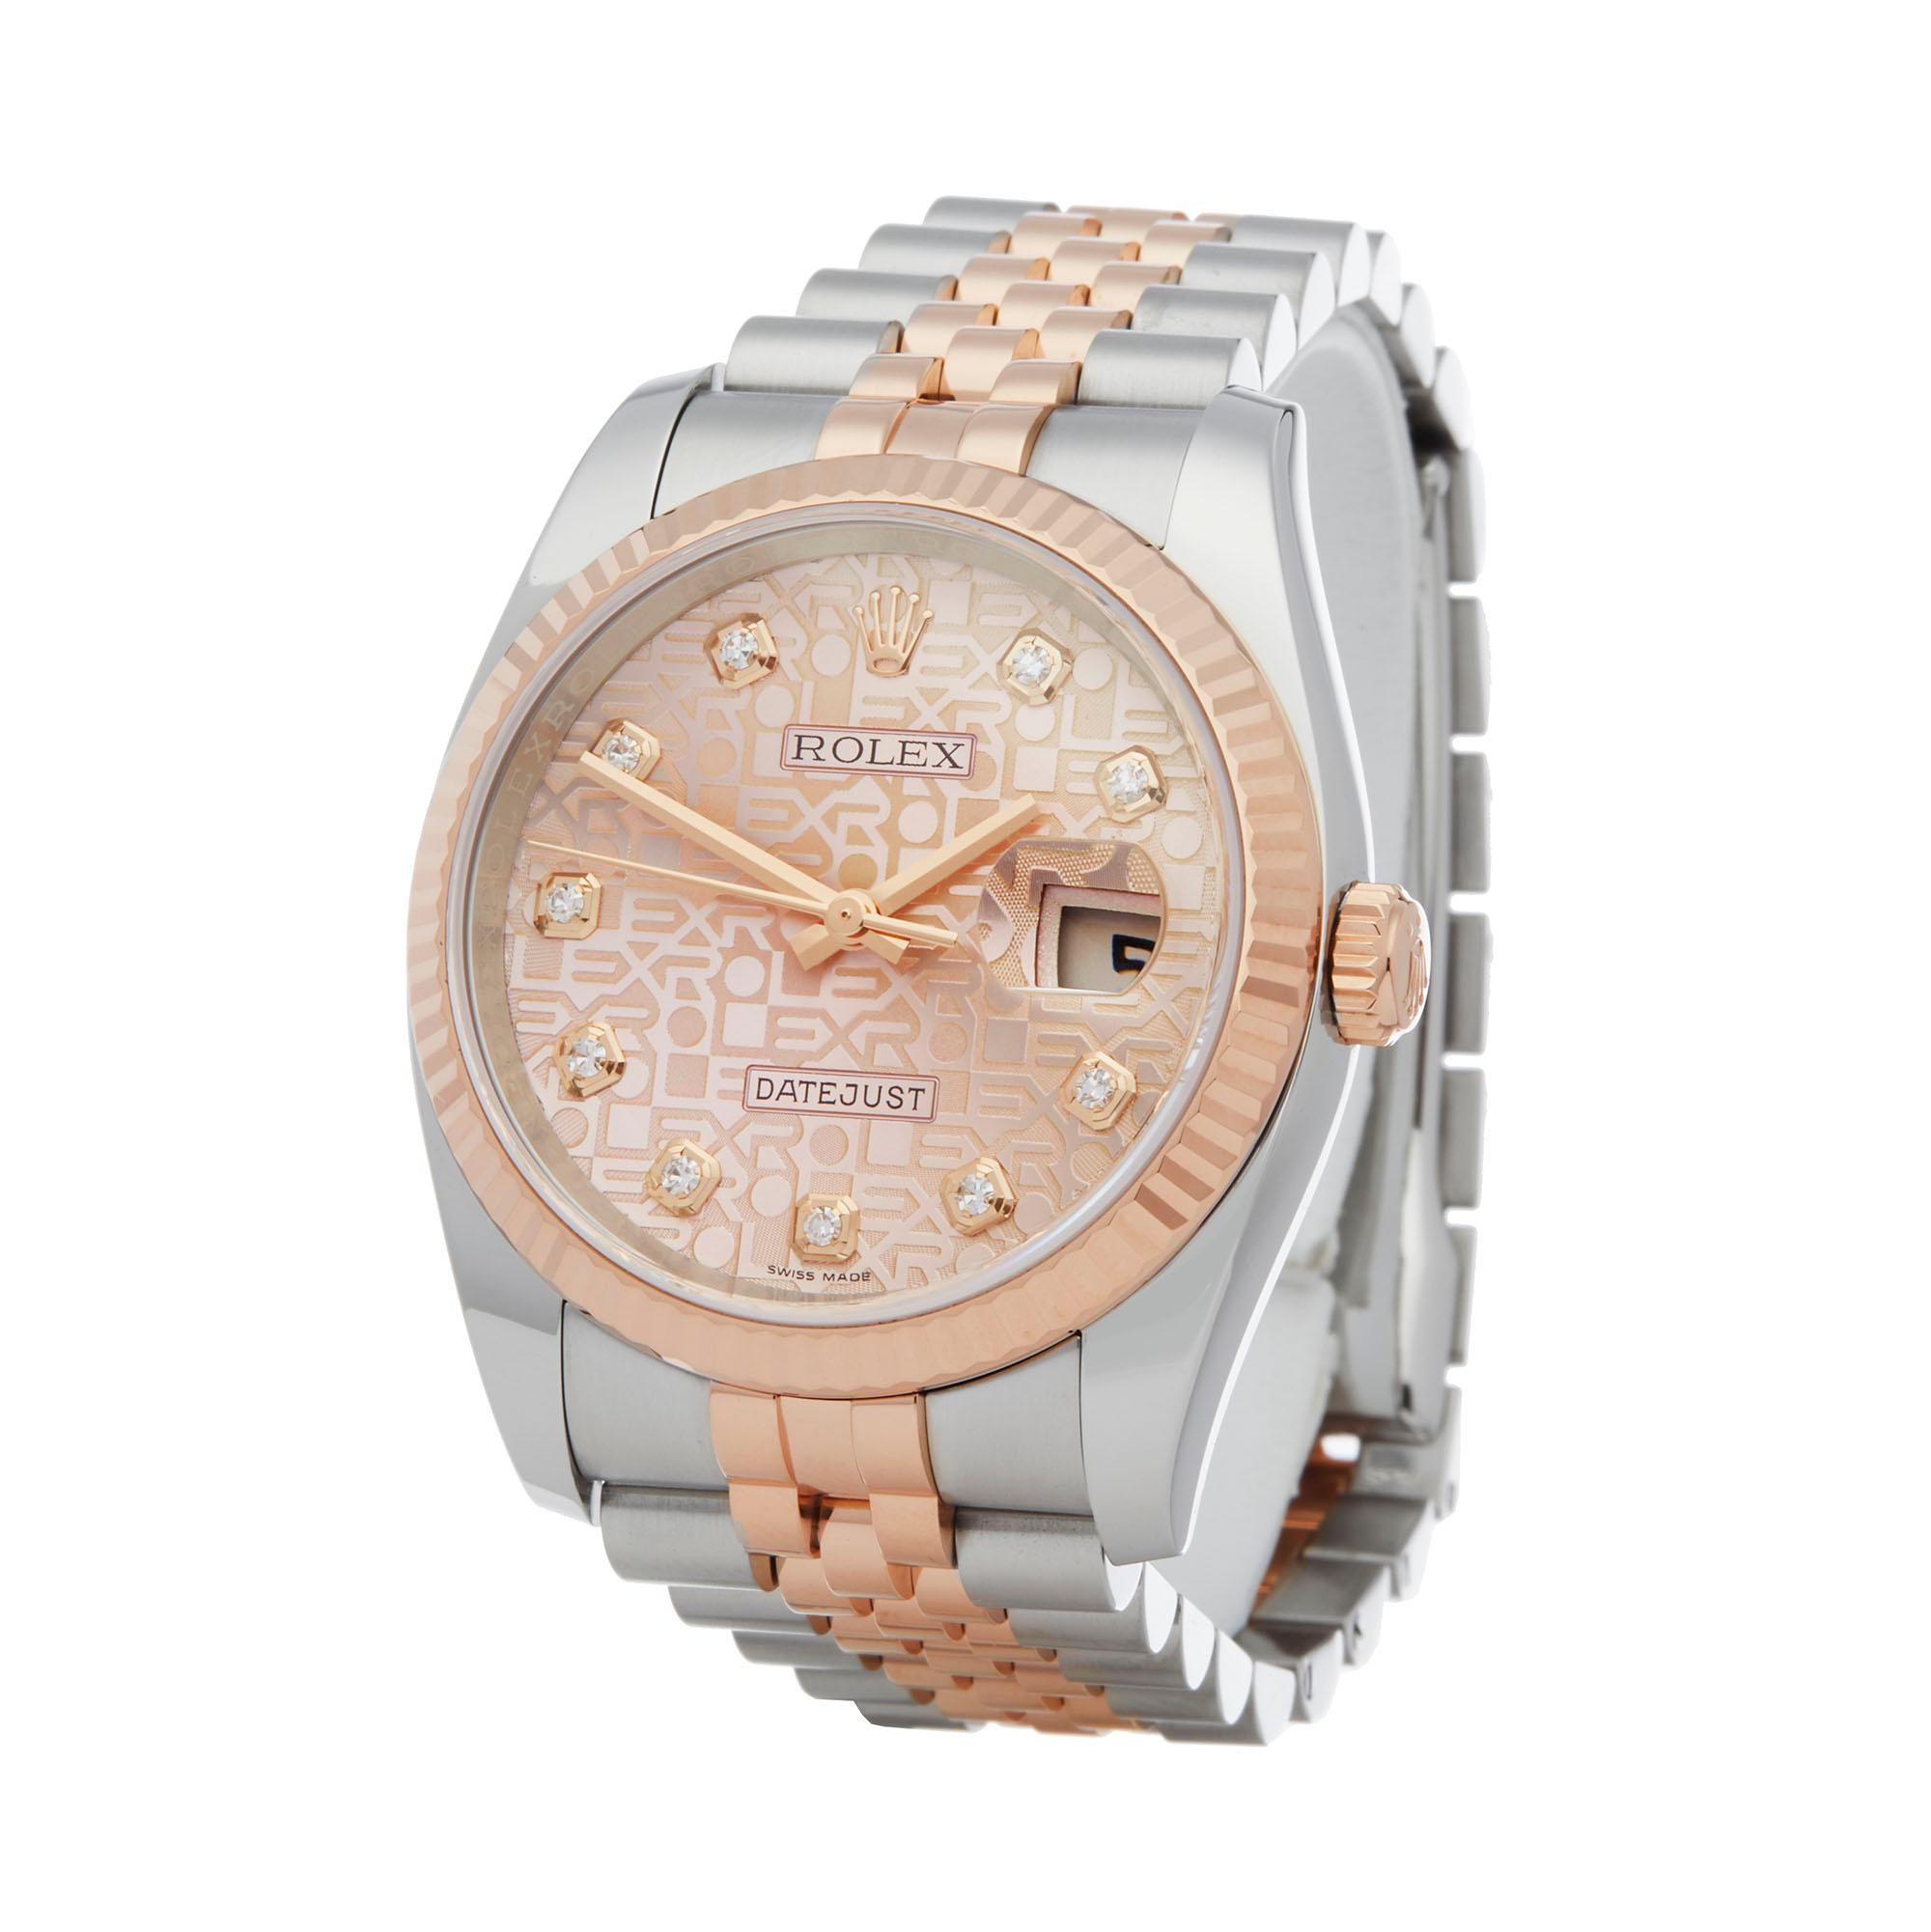 Ref: W6220
Manufacturer: Rolex
Model: DateJust
Model Ref: 116231
Age: 29th May 2017
Gender: Unisex
Complete With: Box & Guarantee
Dial: Pink With Diamond Markers
Glass: Sapphire Crystal
Movement: Automatic
Water Resistance: To Manufacturers